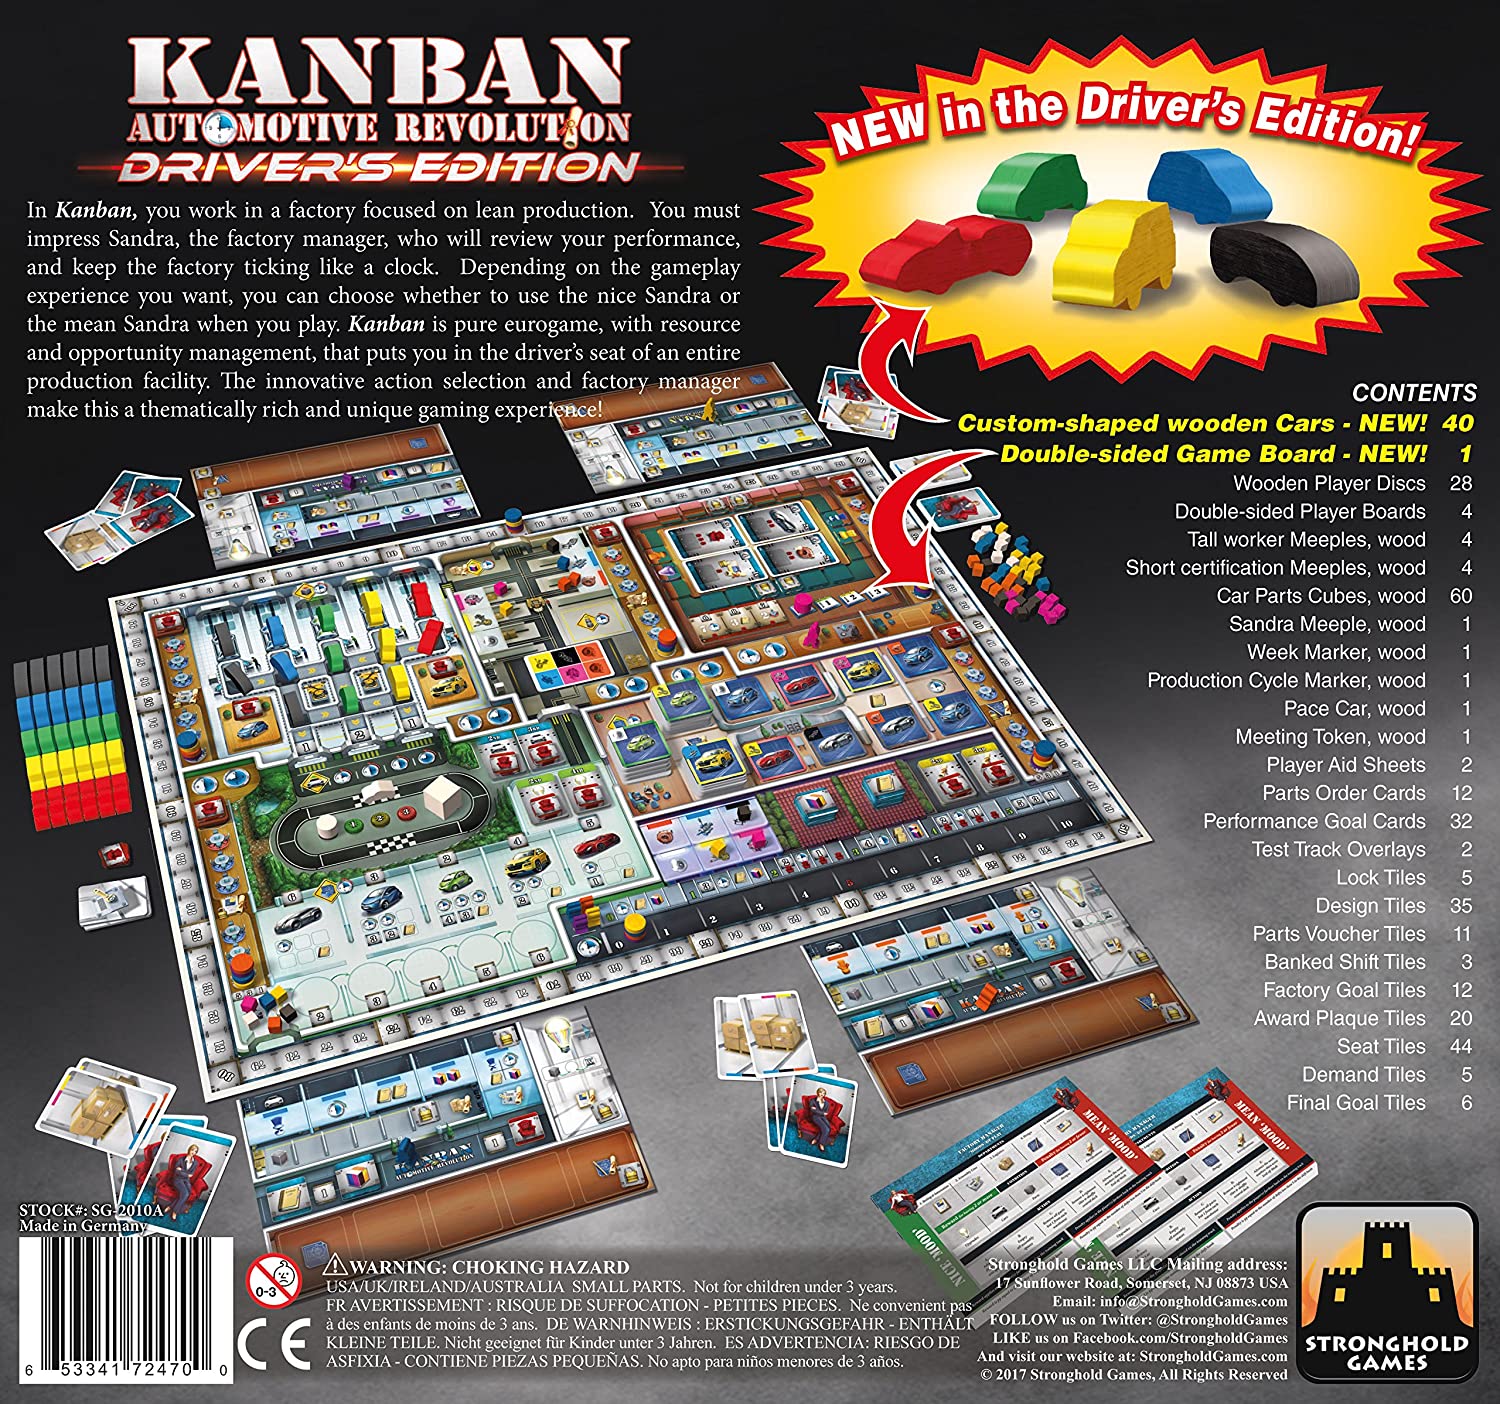 Find out about Kanban: Driver's Edition